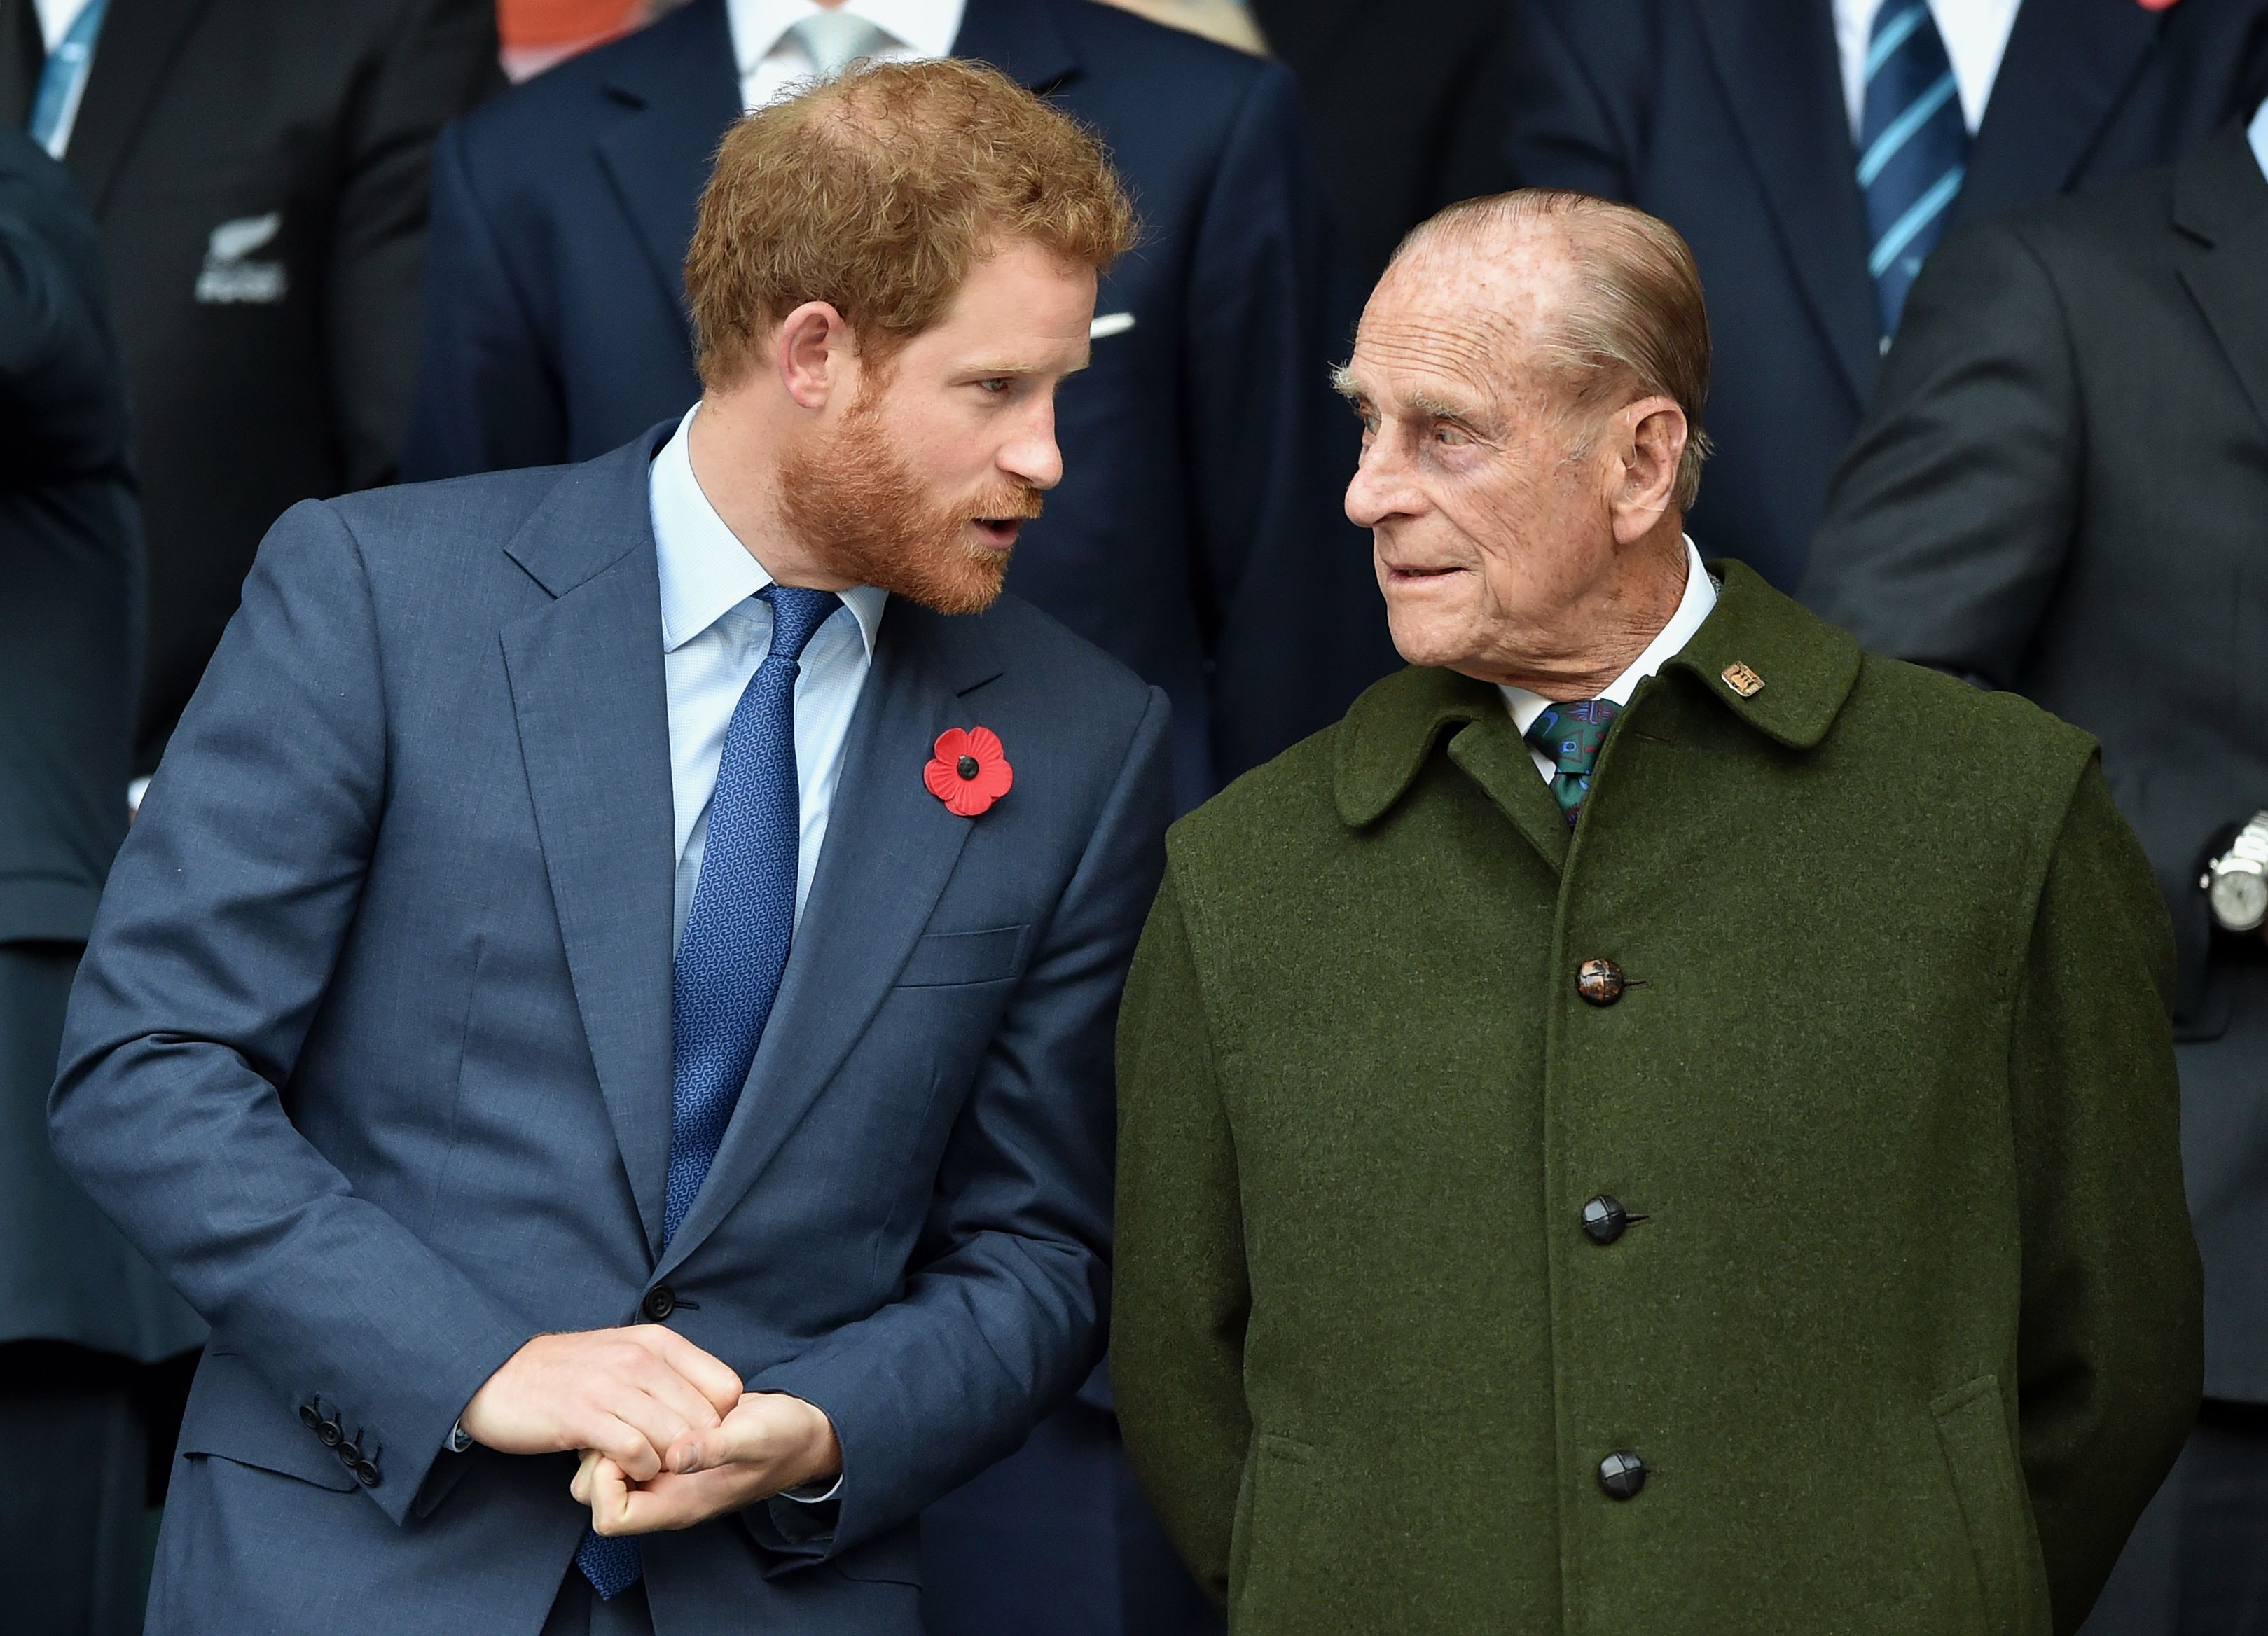 Prince Harry and Prince Philip, Duke of Edinburgh at the 2015 Rugby World Cup Final match between New Zealand and Australia at Twickenham Stadium in London, England | Photo: Max Mumby/Pool/Indigo/Getty Images